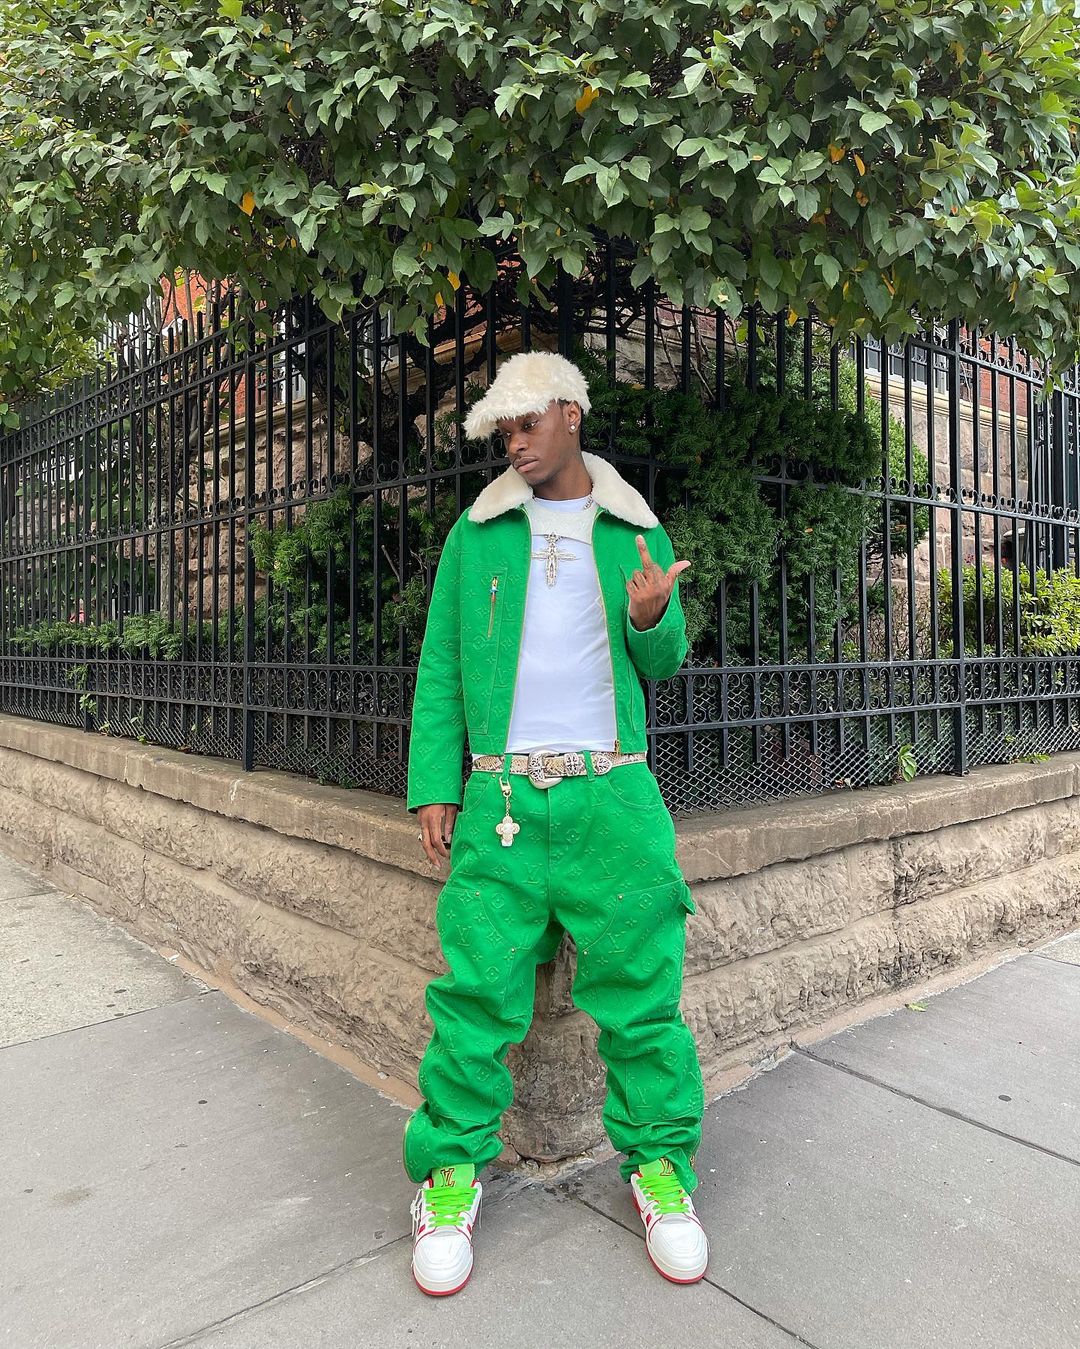 OFFSET Rocking New MARNI Slides, LOUIS VUITTON Jeans By VIRGIL